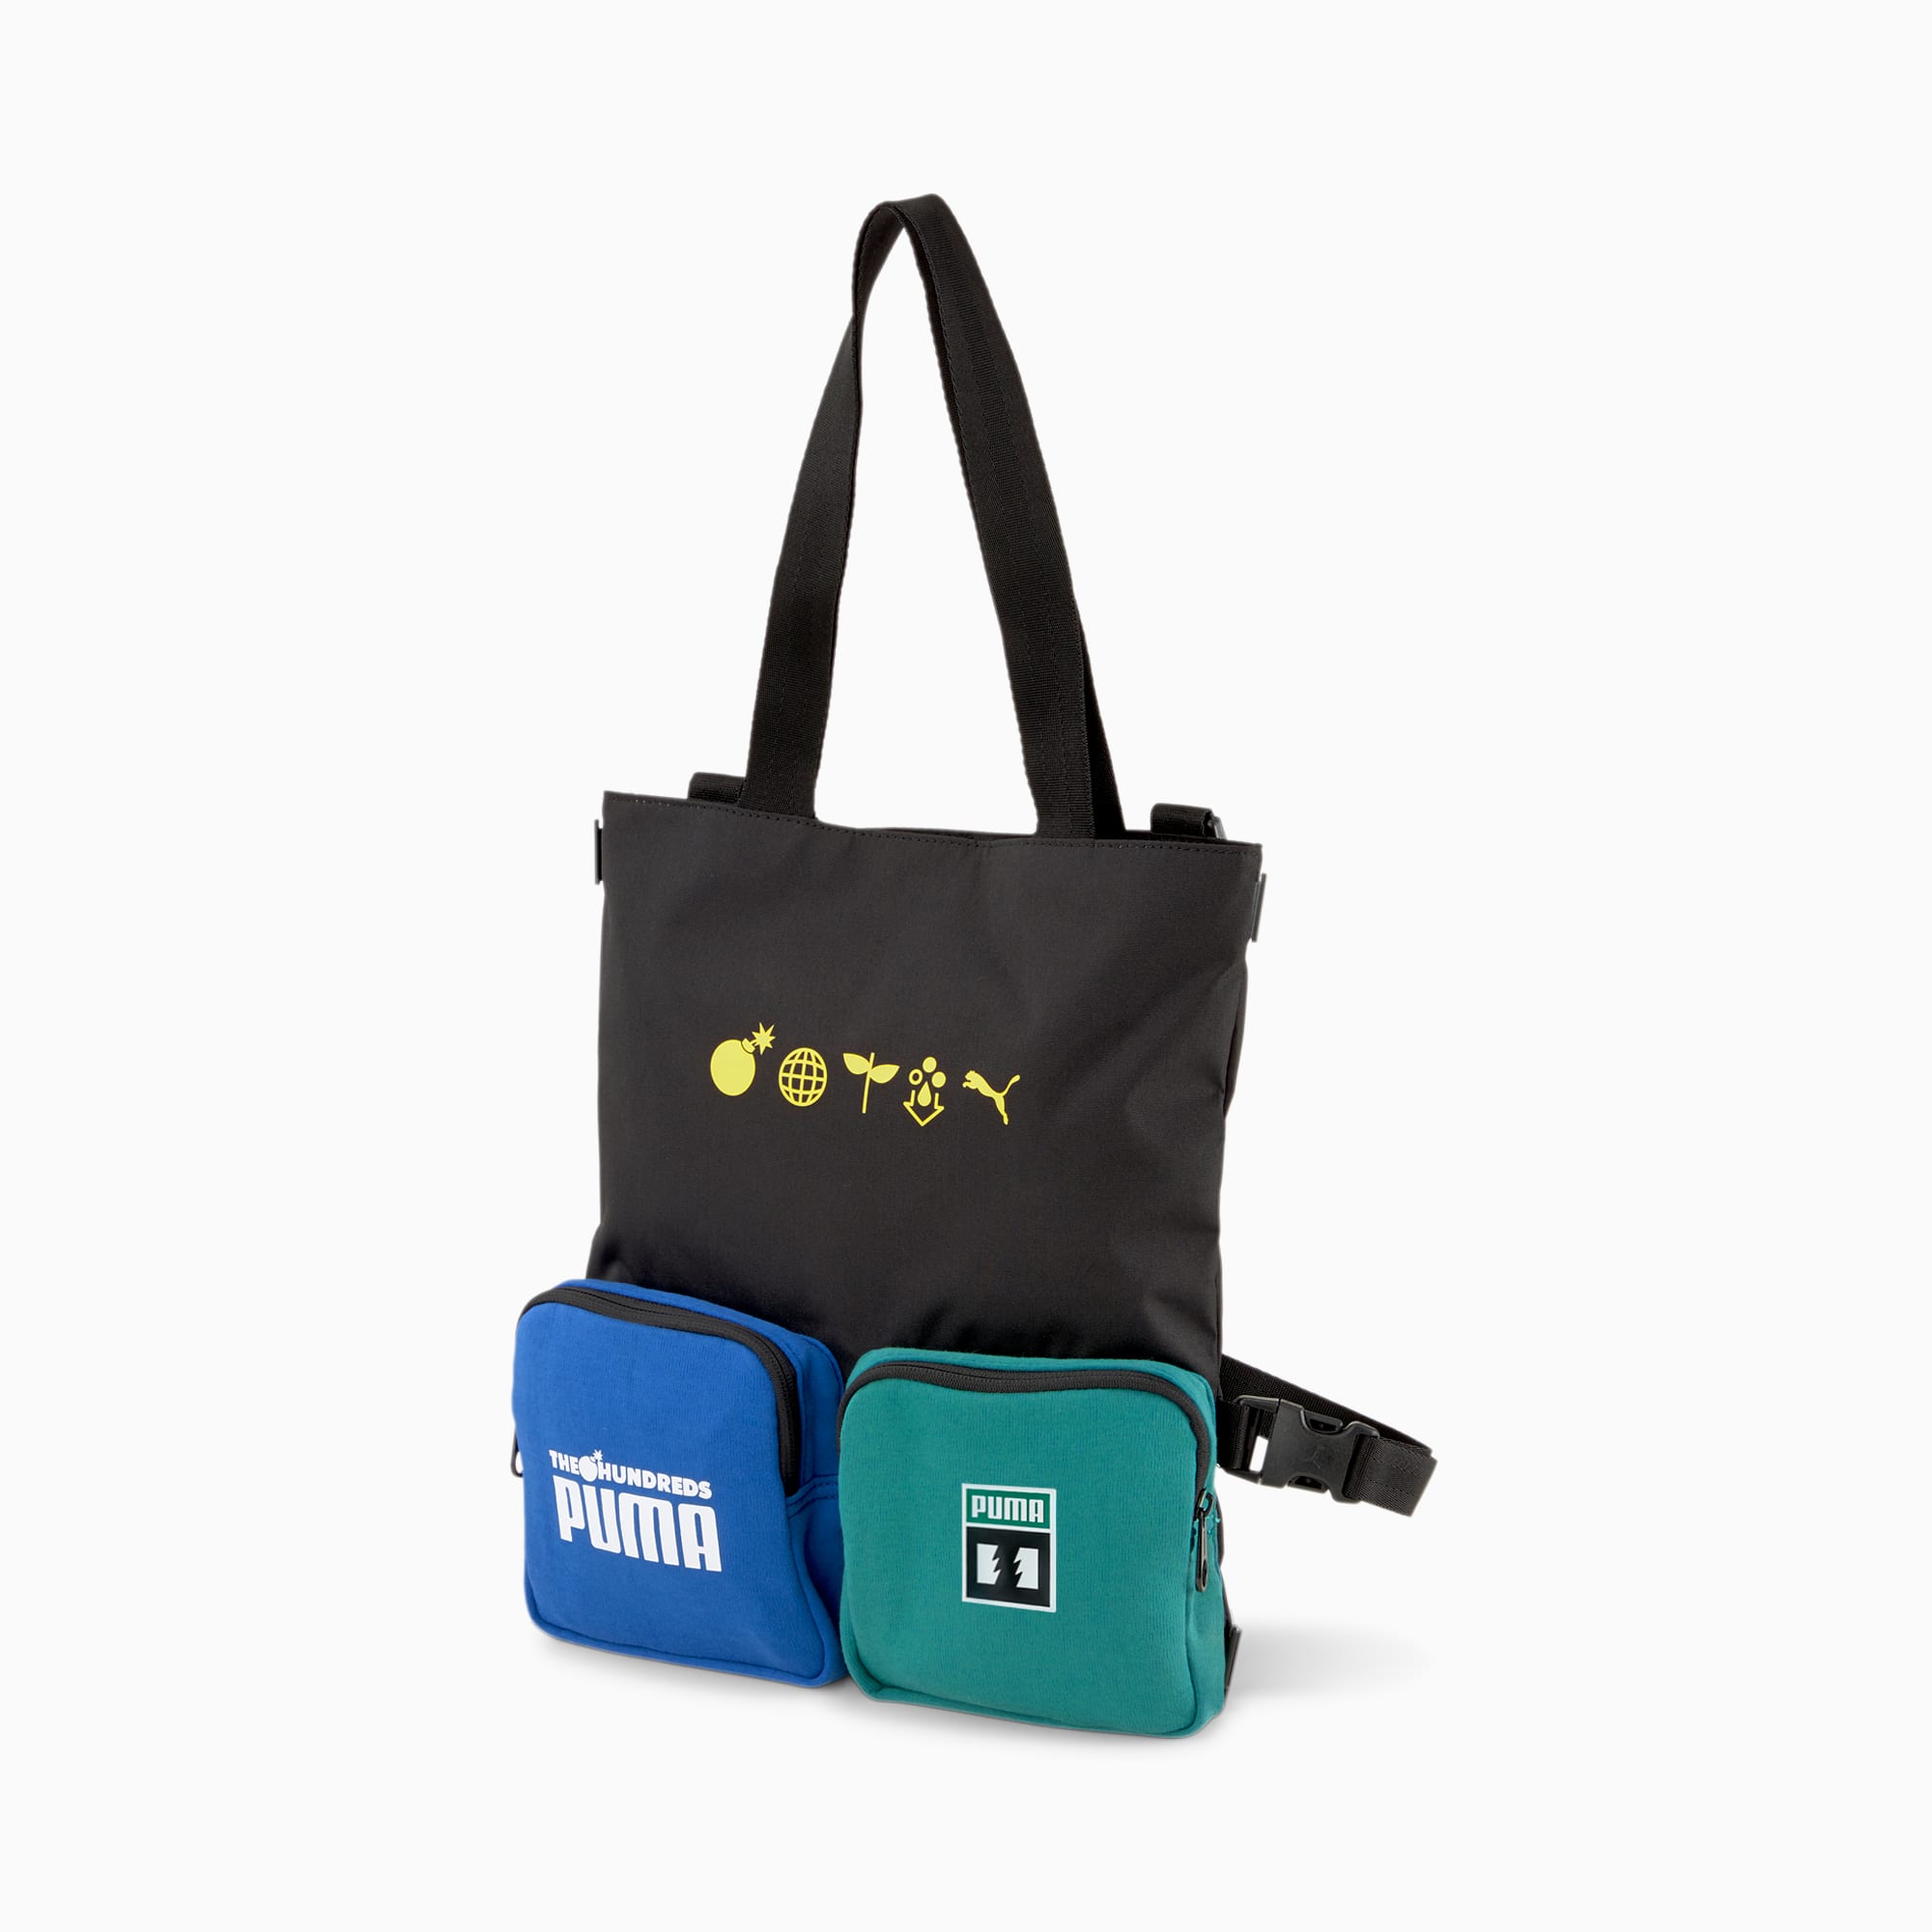 images of puma bags